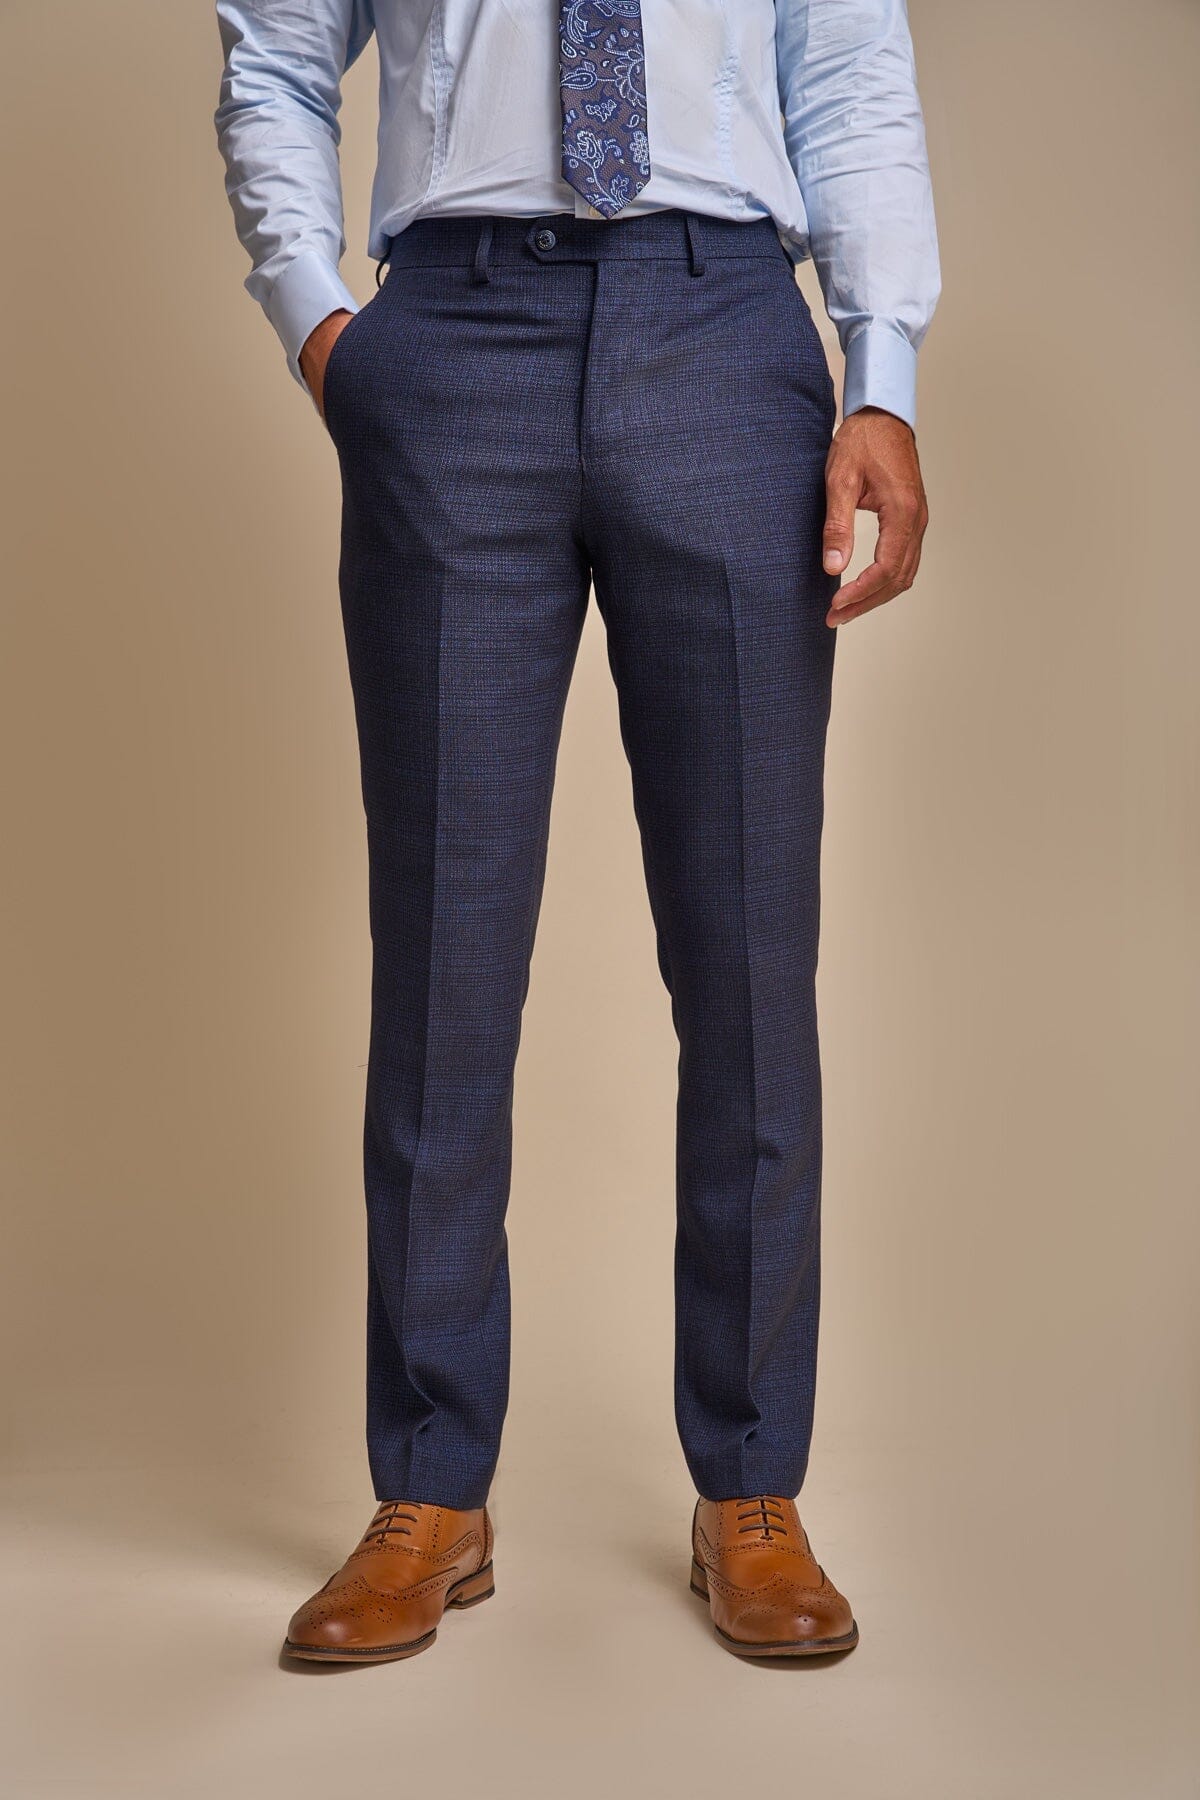 Caridi Navy Trousers - Trousers - 28R 